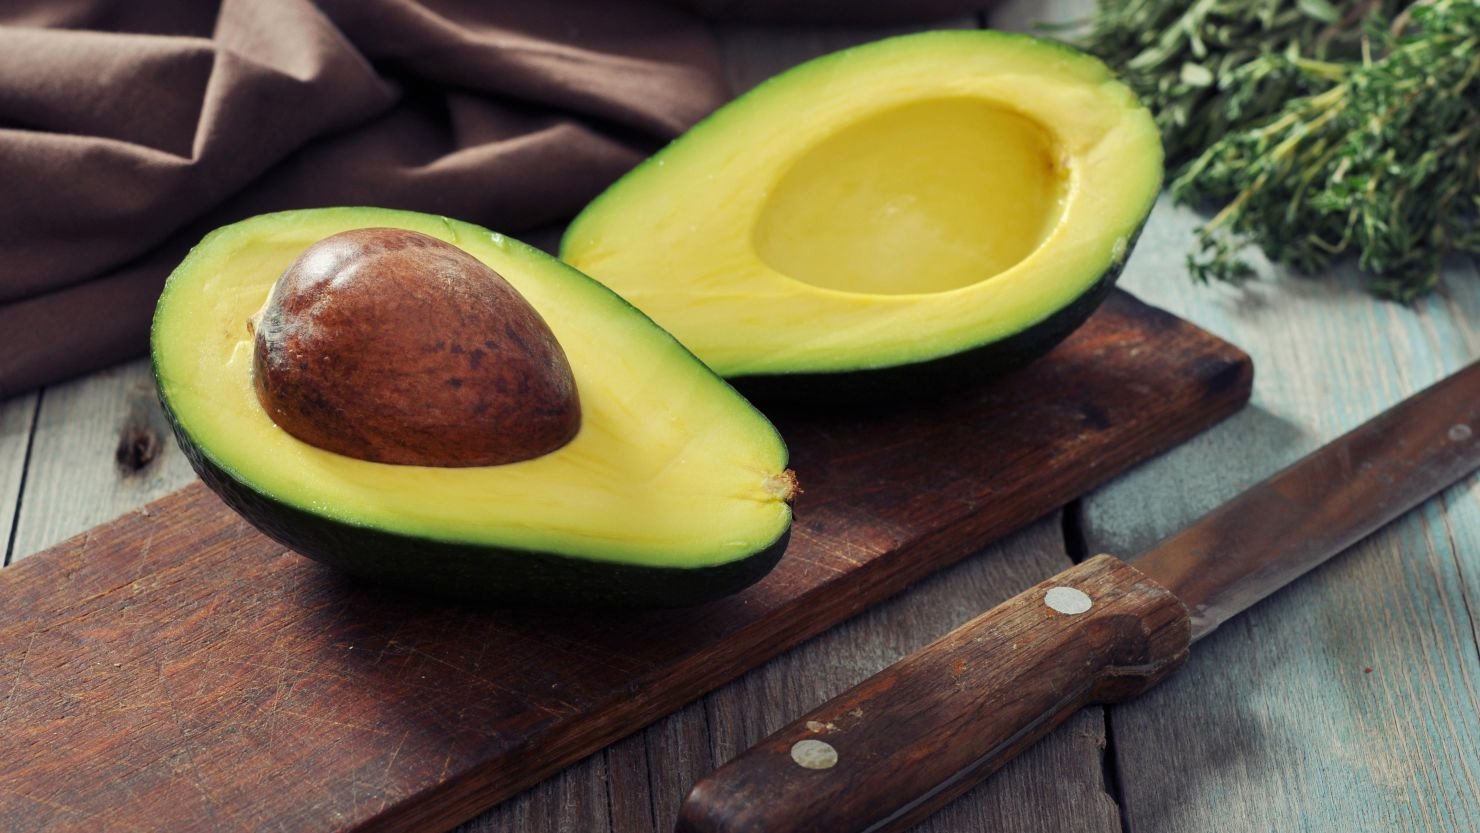 Avocado Benefits | This miraculous fruit is very beneficial for health